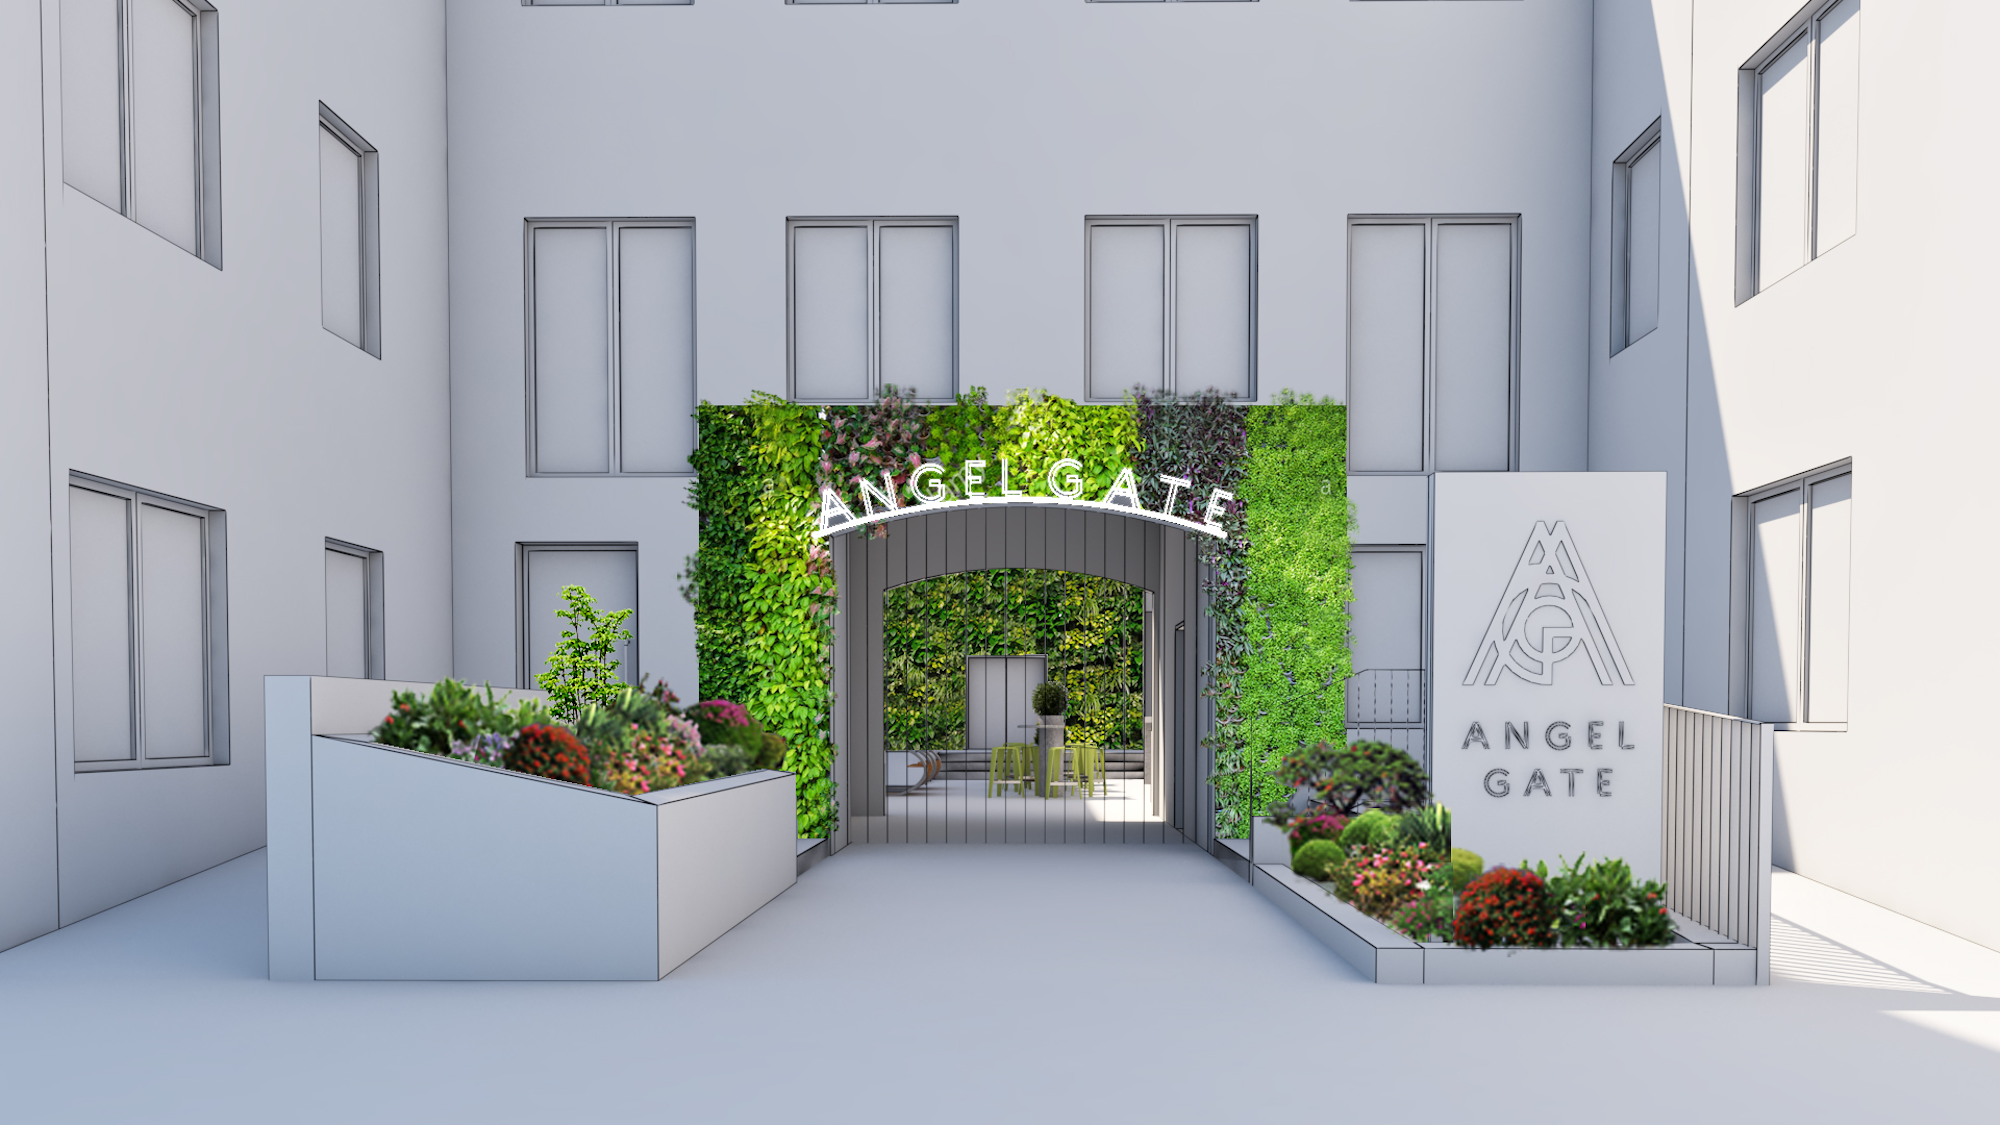 3D visual showing an entrance way with a natural living wall and lit up signage with ground planting